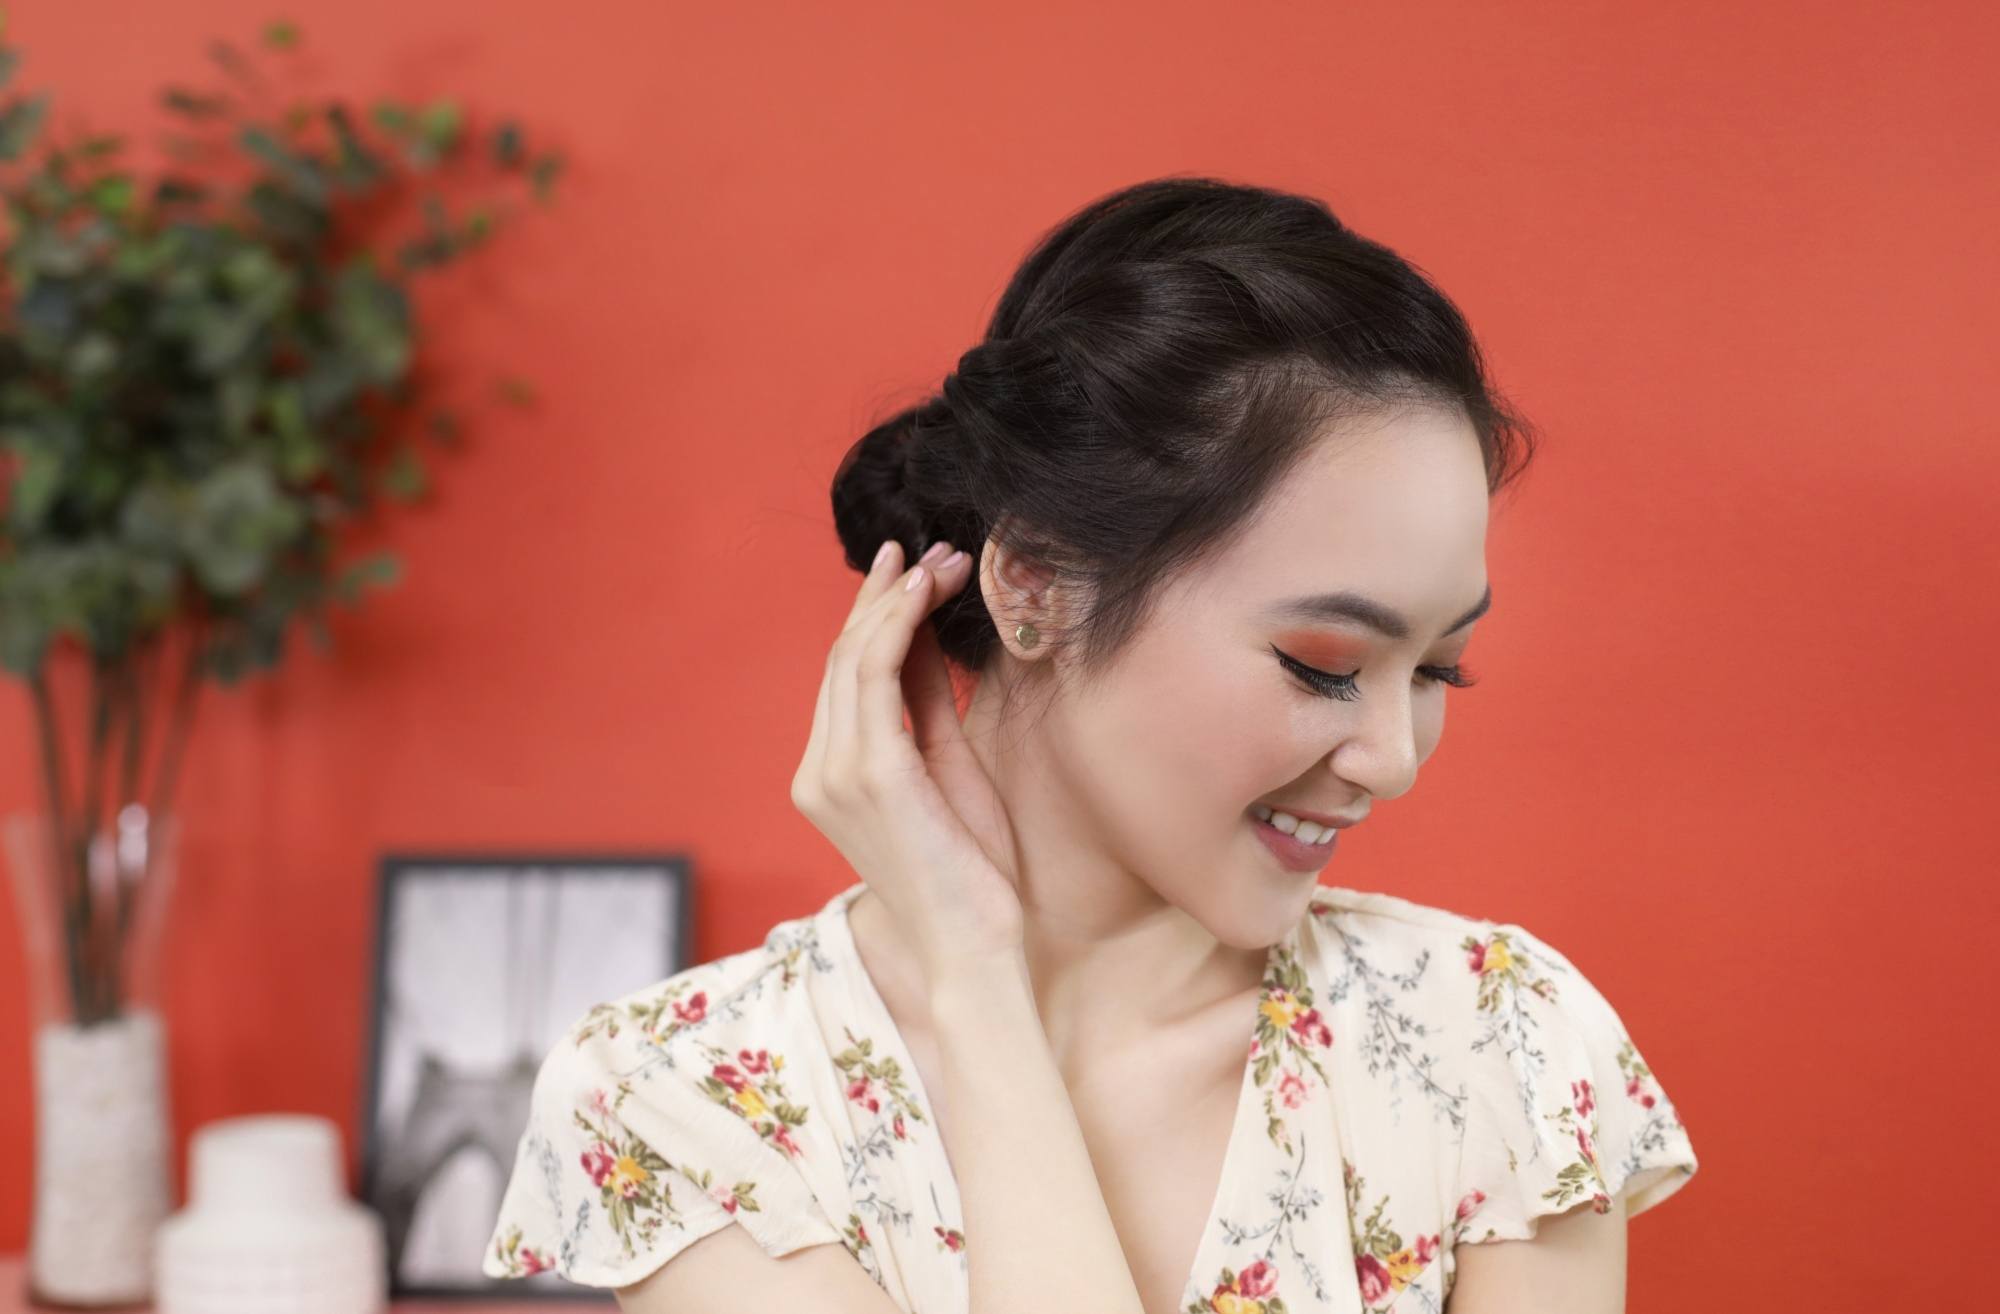 Closeup shot of an Asian woman with french rope braid bun hairstyle wearing a floral dress against an orange wall